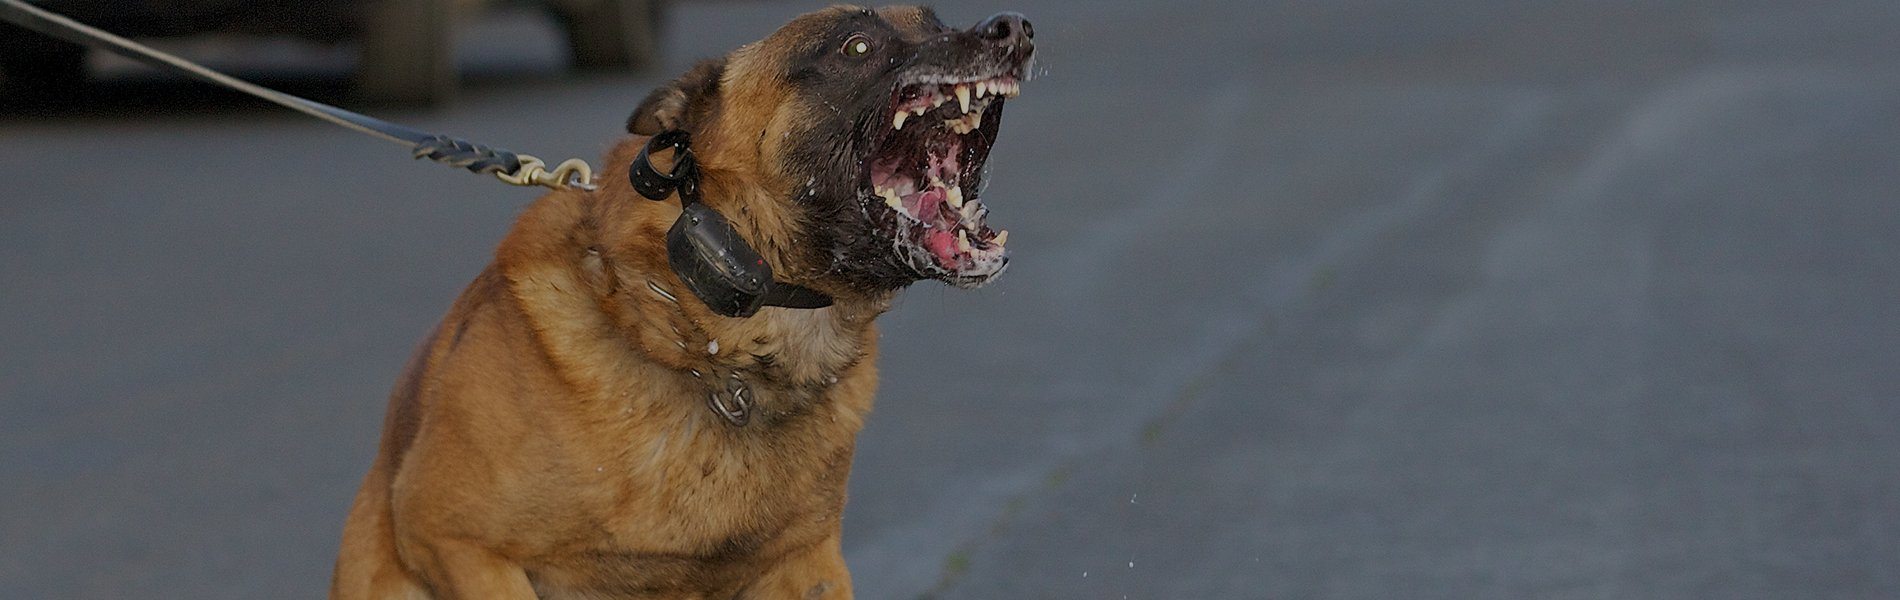 57 Postal Workers Attacked By Dogs In San Diego Last Year